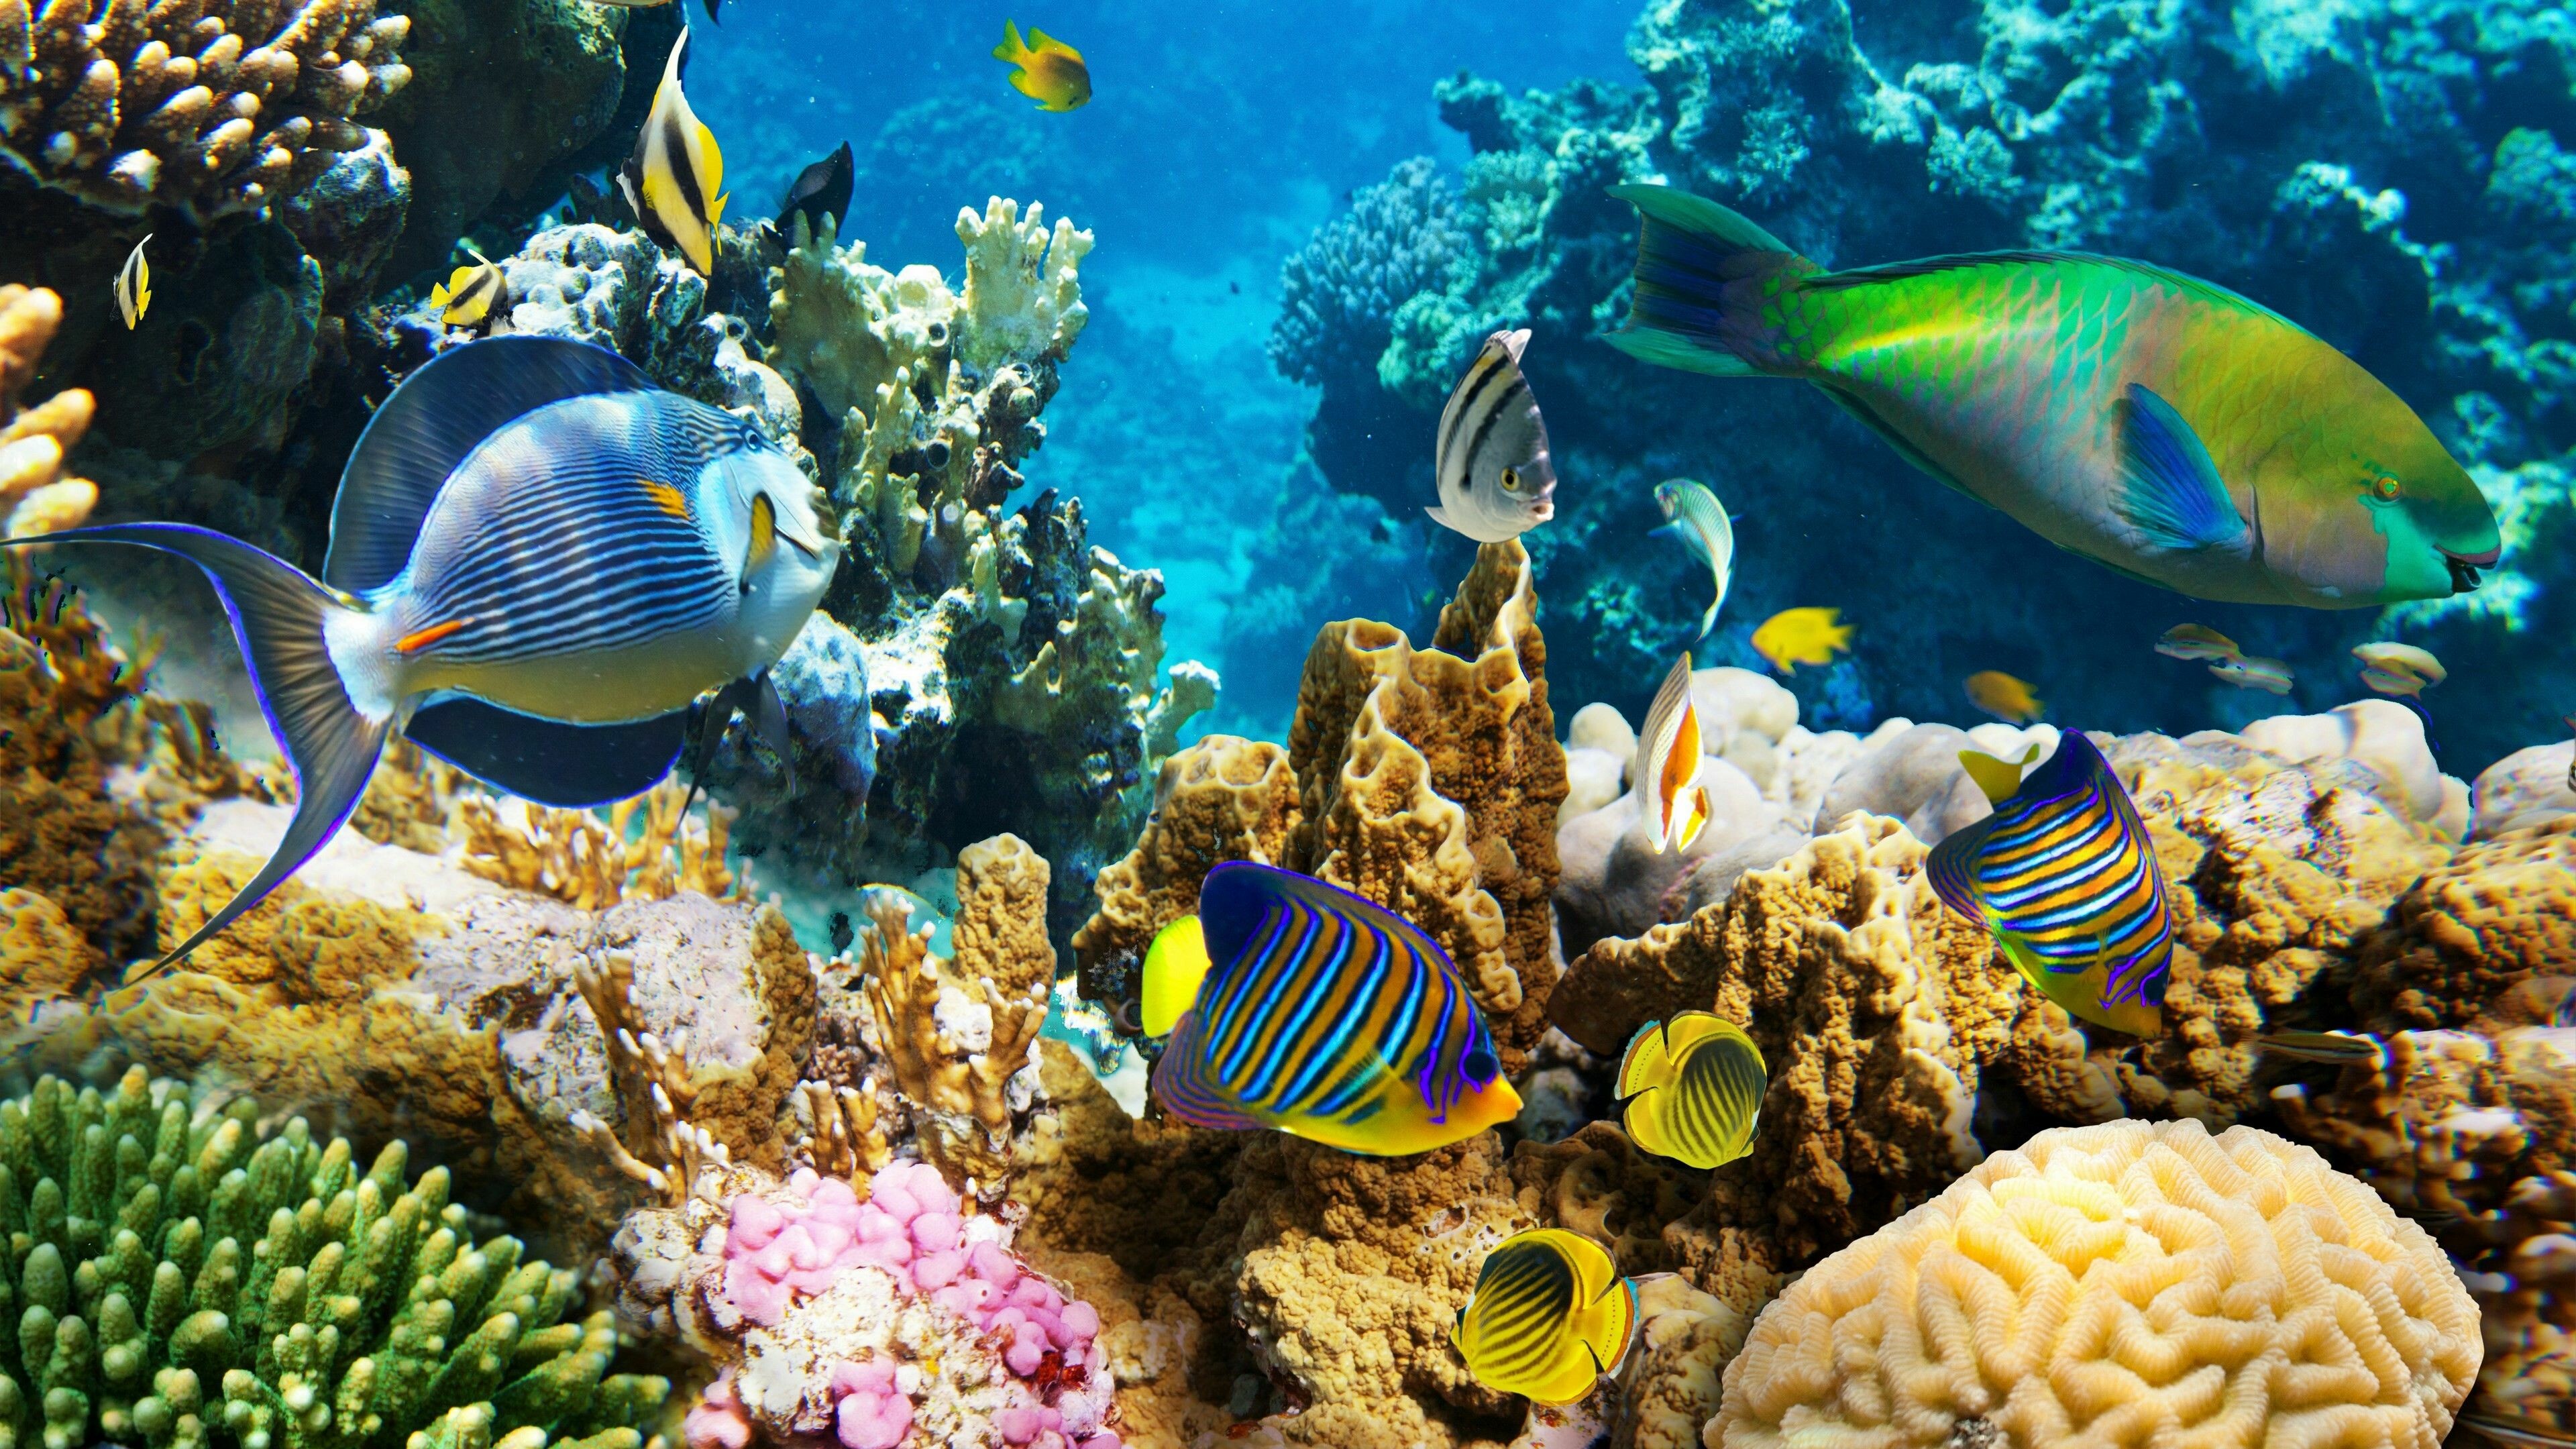 Coral Reef: Most reefs grow best in warm, shallow, clear, sunny, and agitated water. 3840x2160 4K Wallpaper.